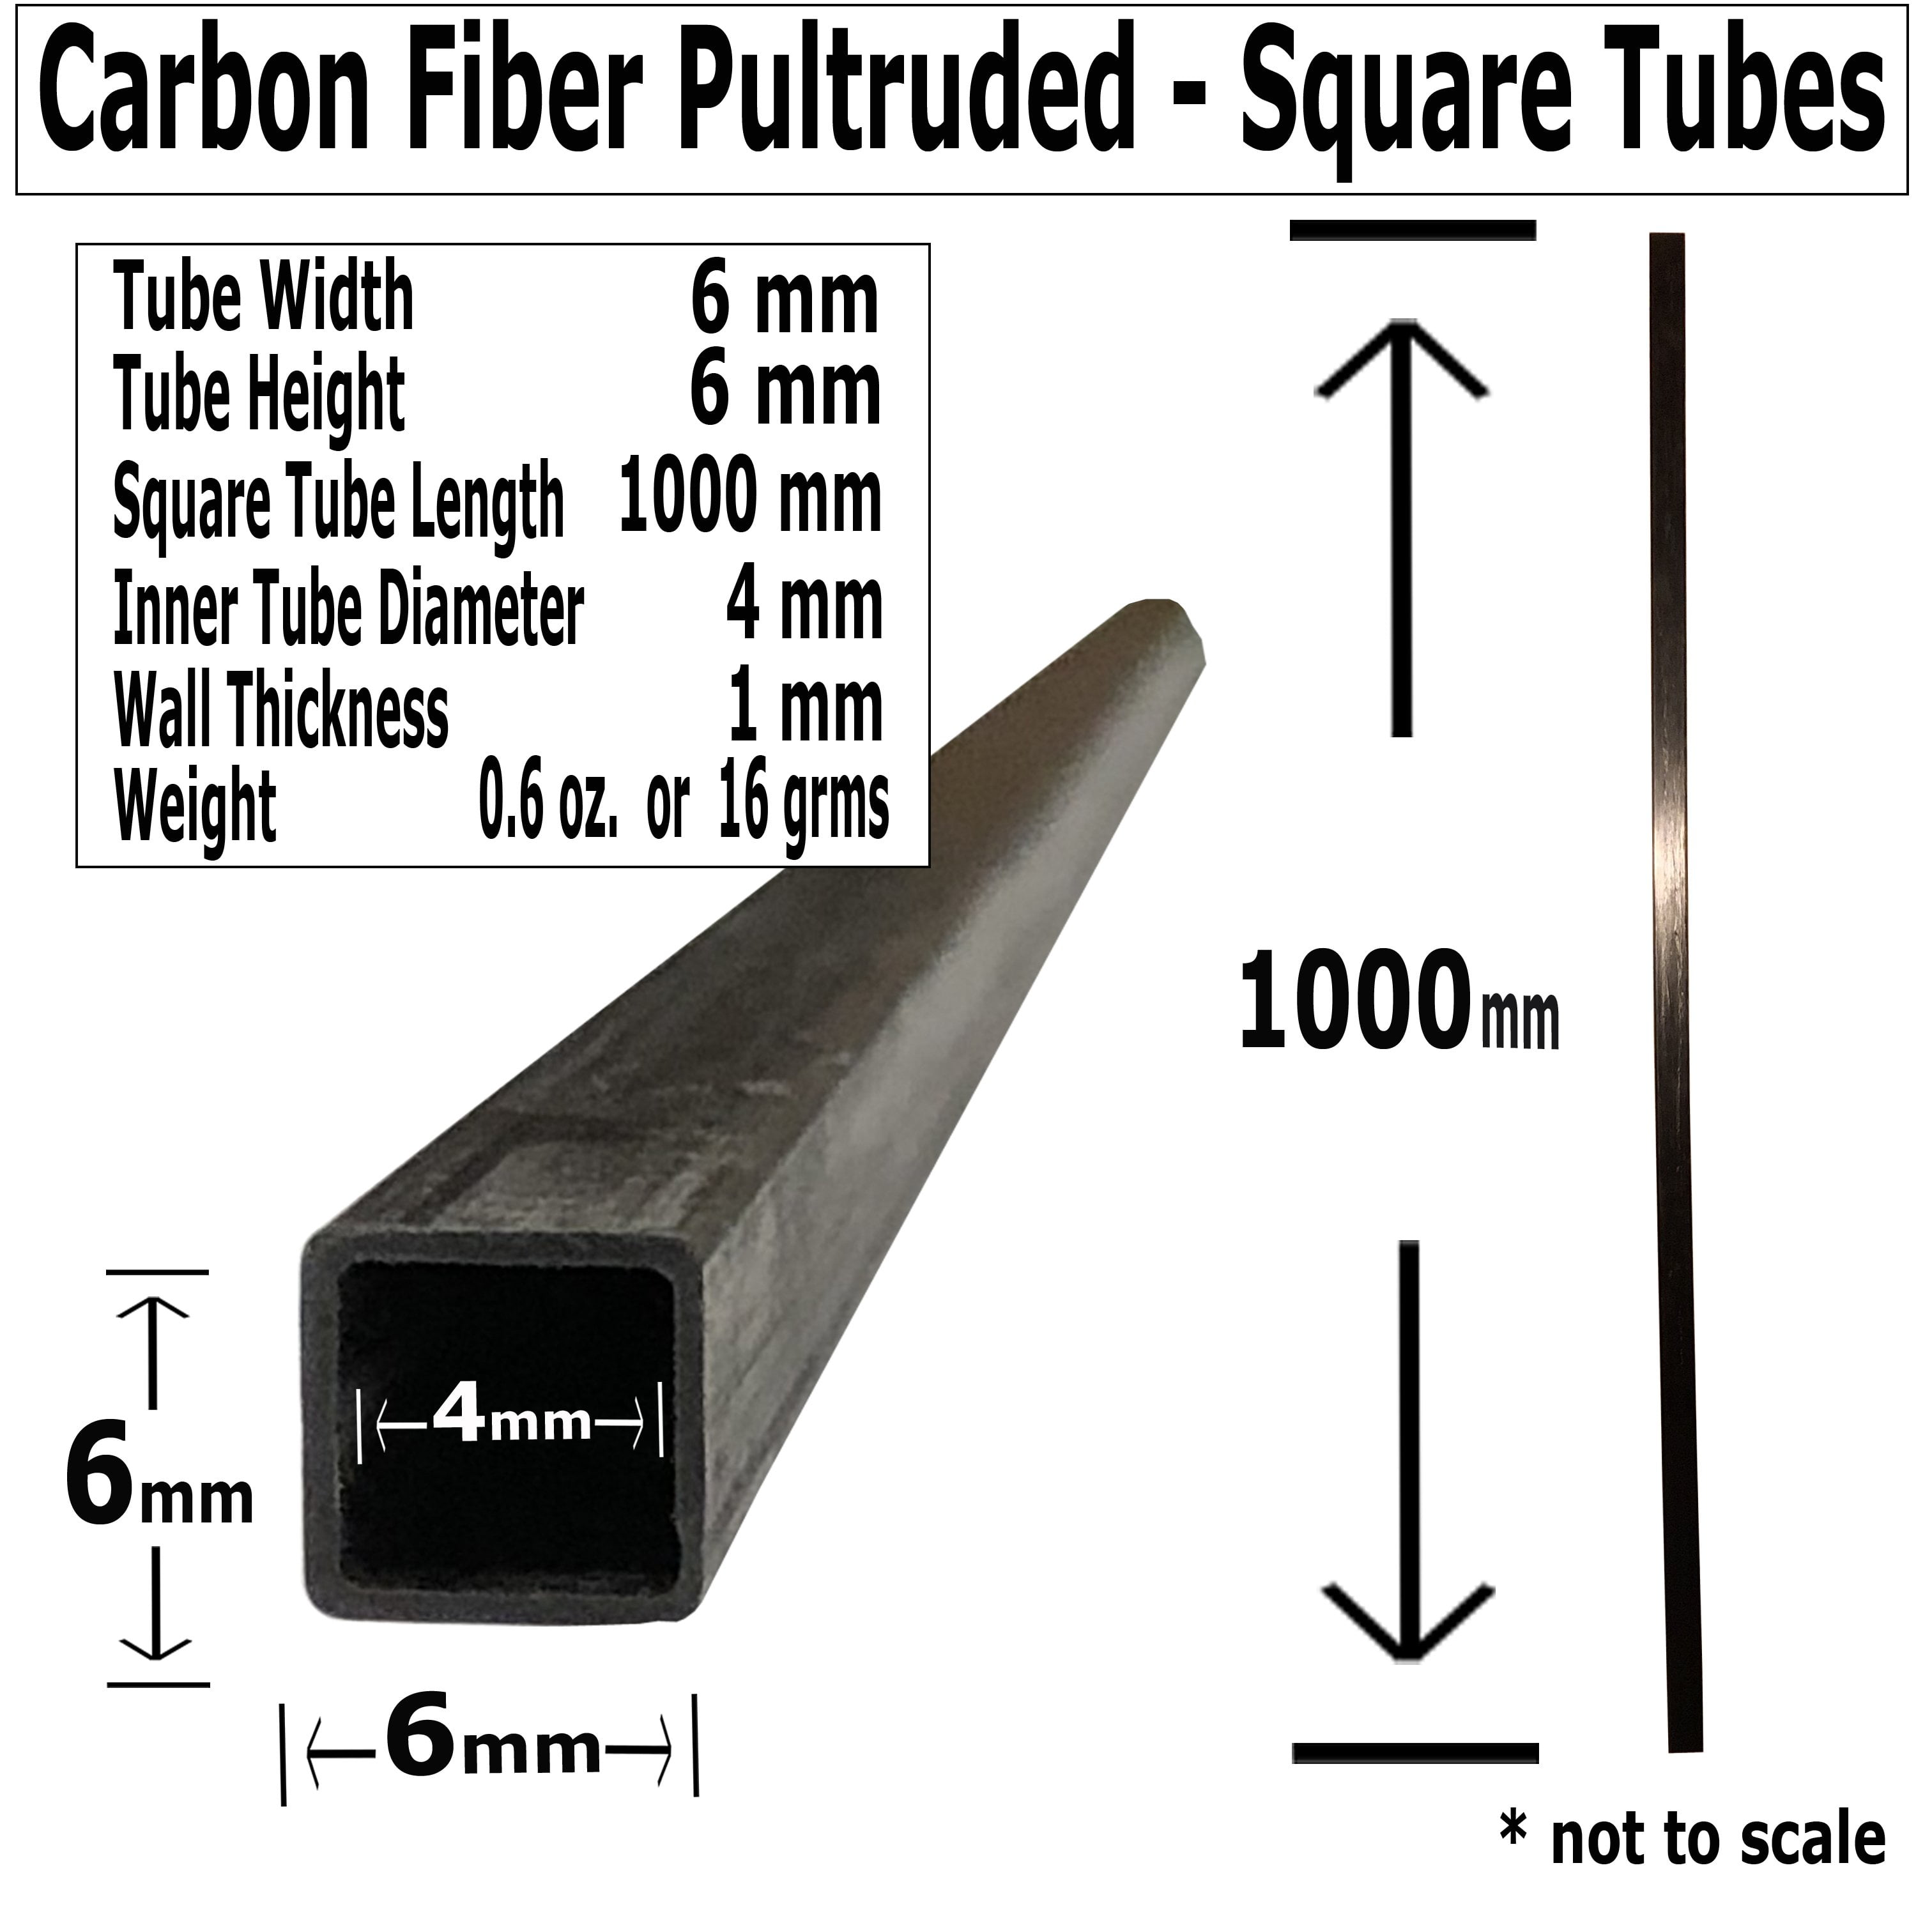 PULTRUDED-Square Carbon Fiber Rods 4 100% Pultruded high... 4mm X 1000mm 